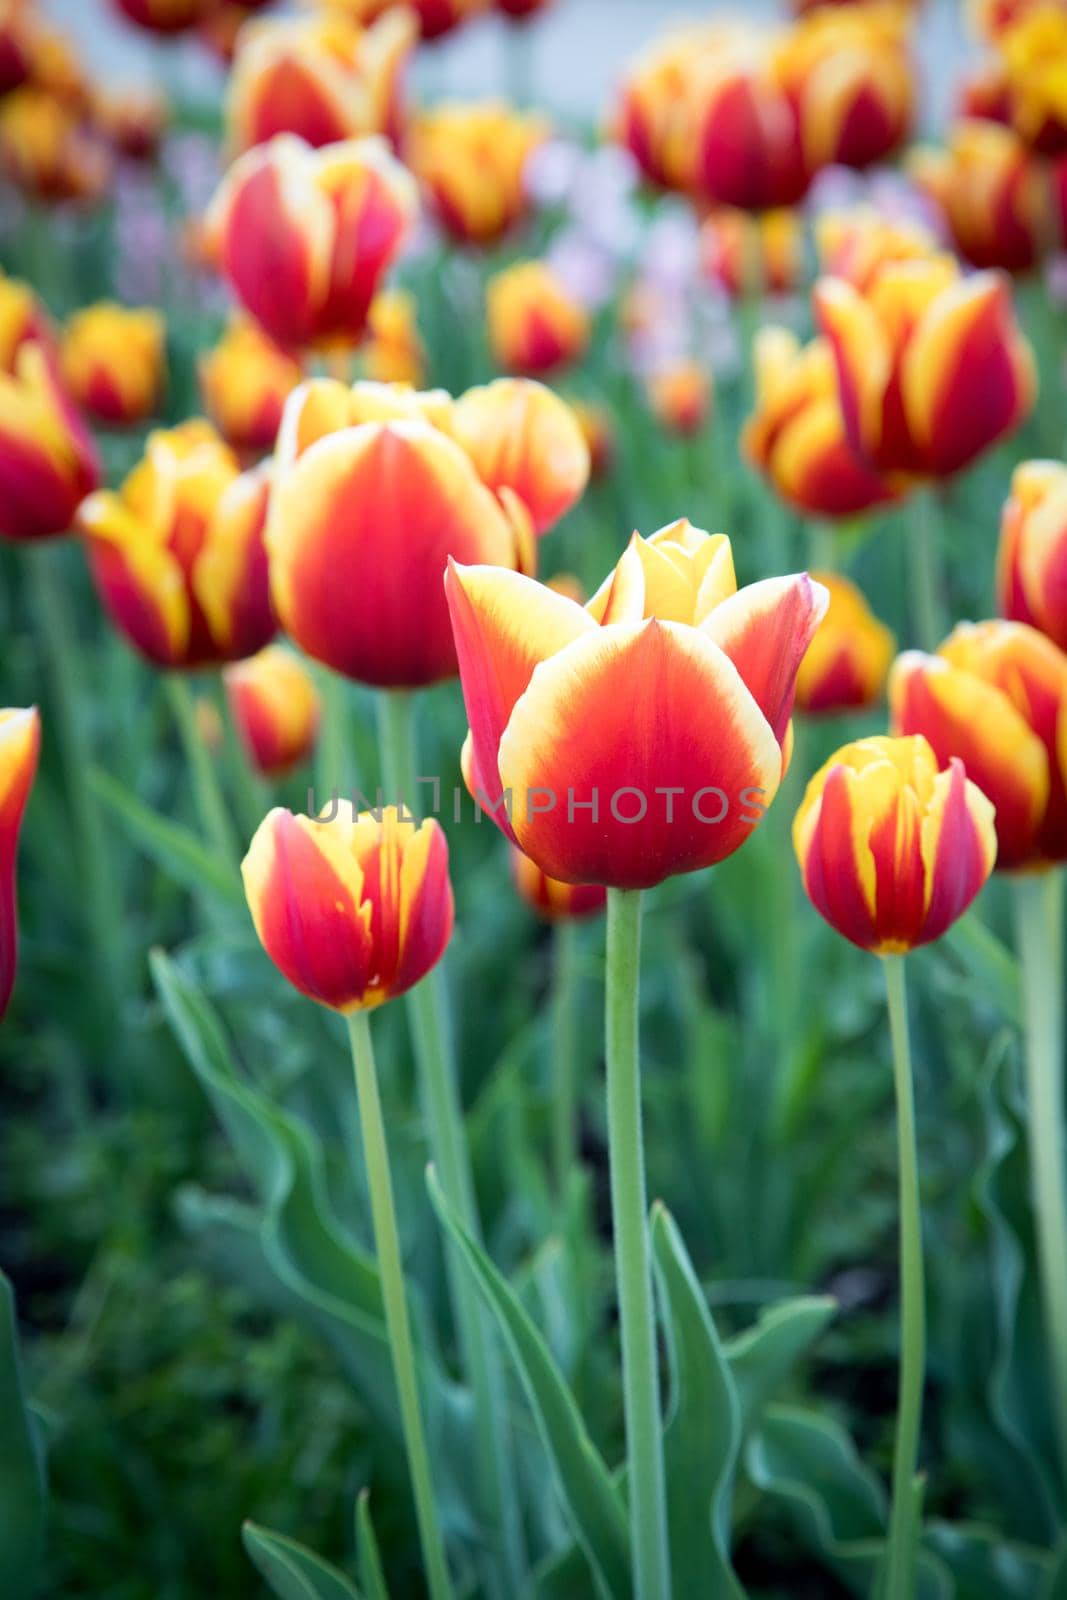 Colorful spring flowers (tulips) in the public park